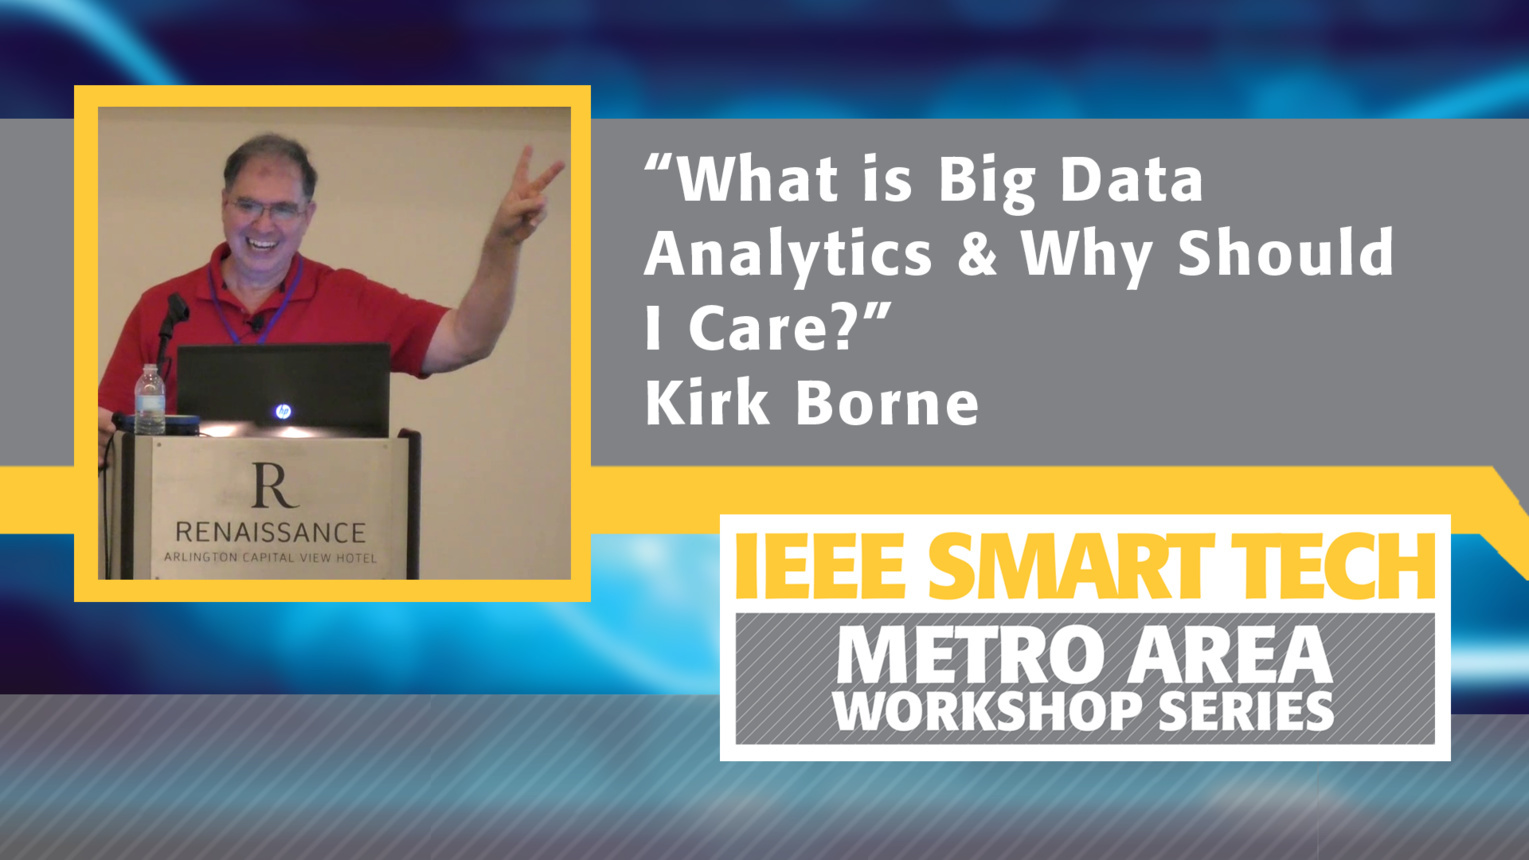 "What is Big Data Analytics and Why Should I Care?" - Big Data Analytics Tutorial Part 1